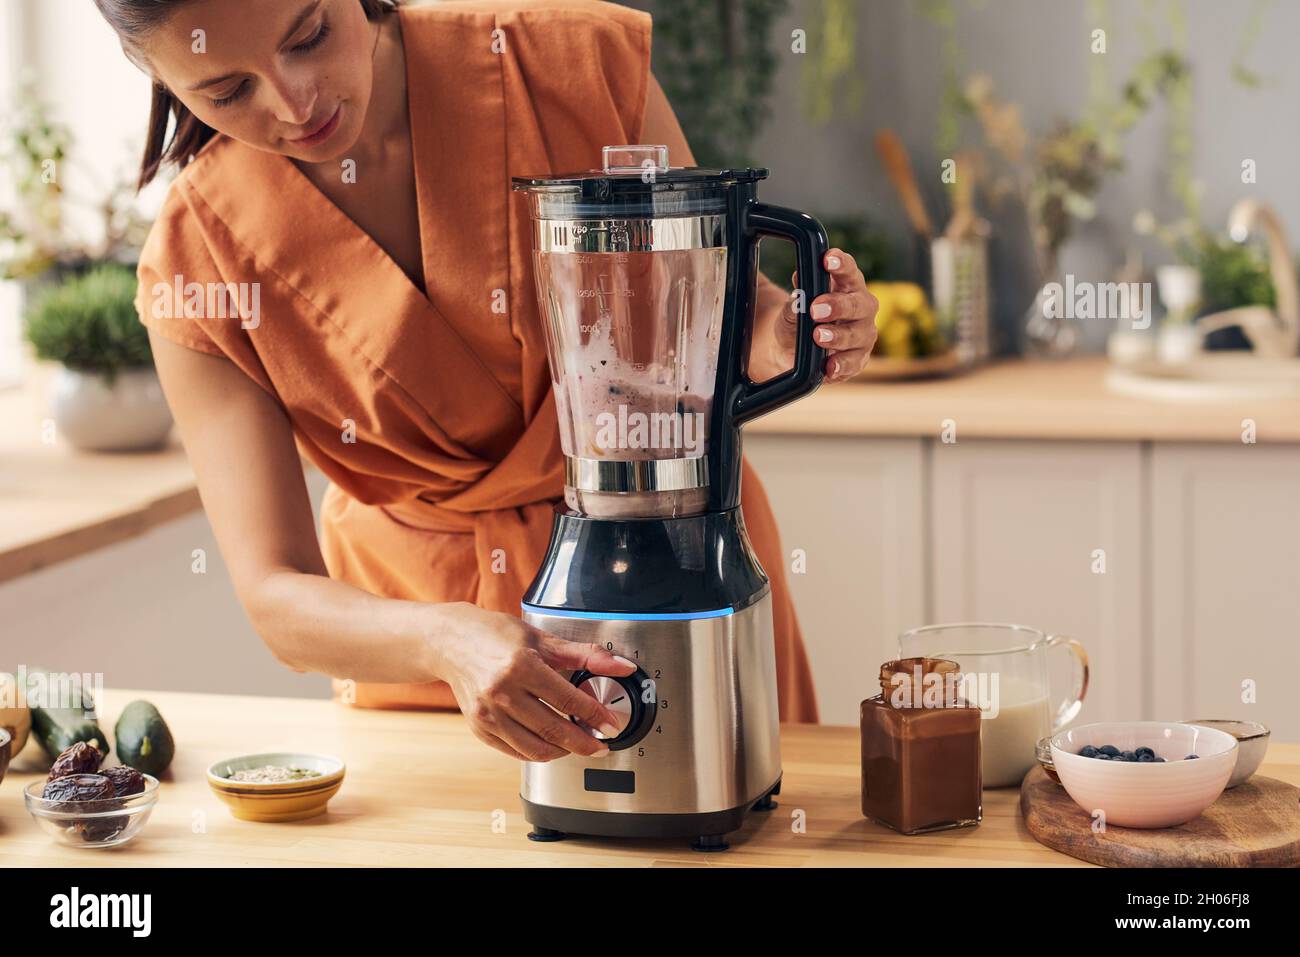 https://c8.alamy.com/comp/2H06FJ8/young-female-mixing-ingredients-in-electric-blender-while-making-smoothie-in-the-kitchen-2H06FJ8.jpg